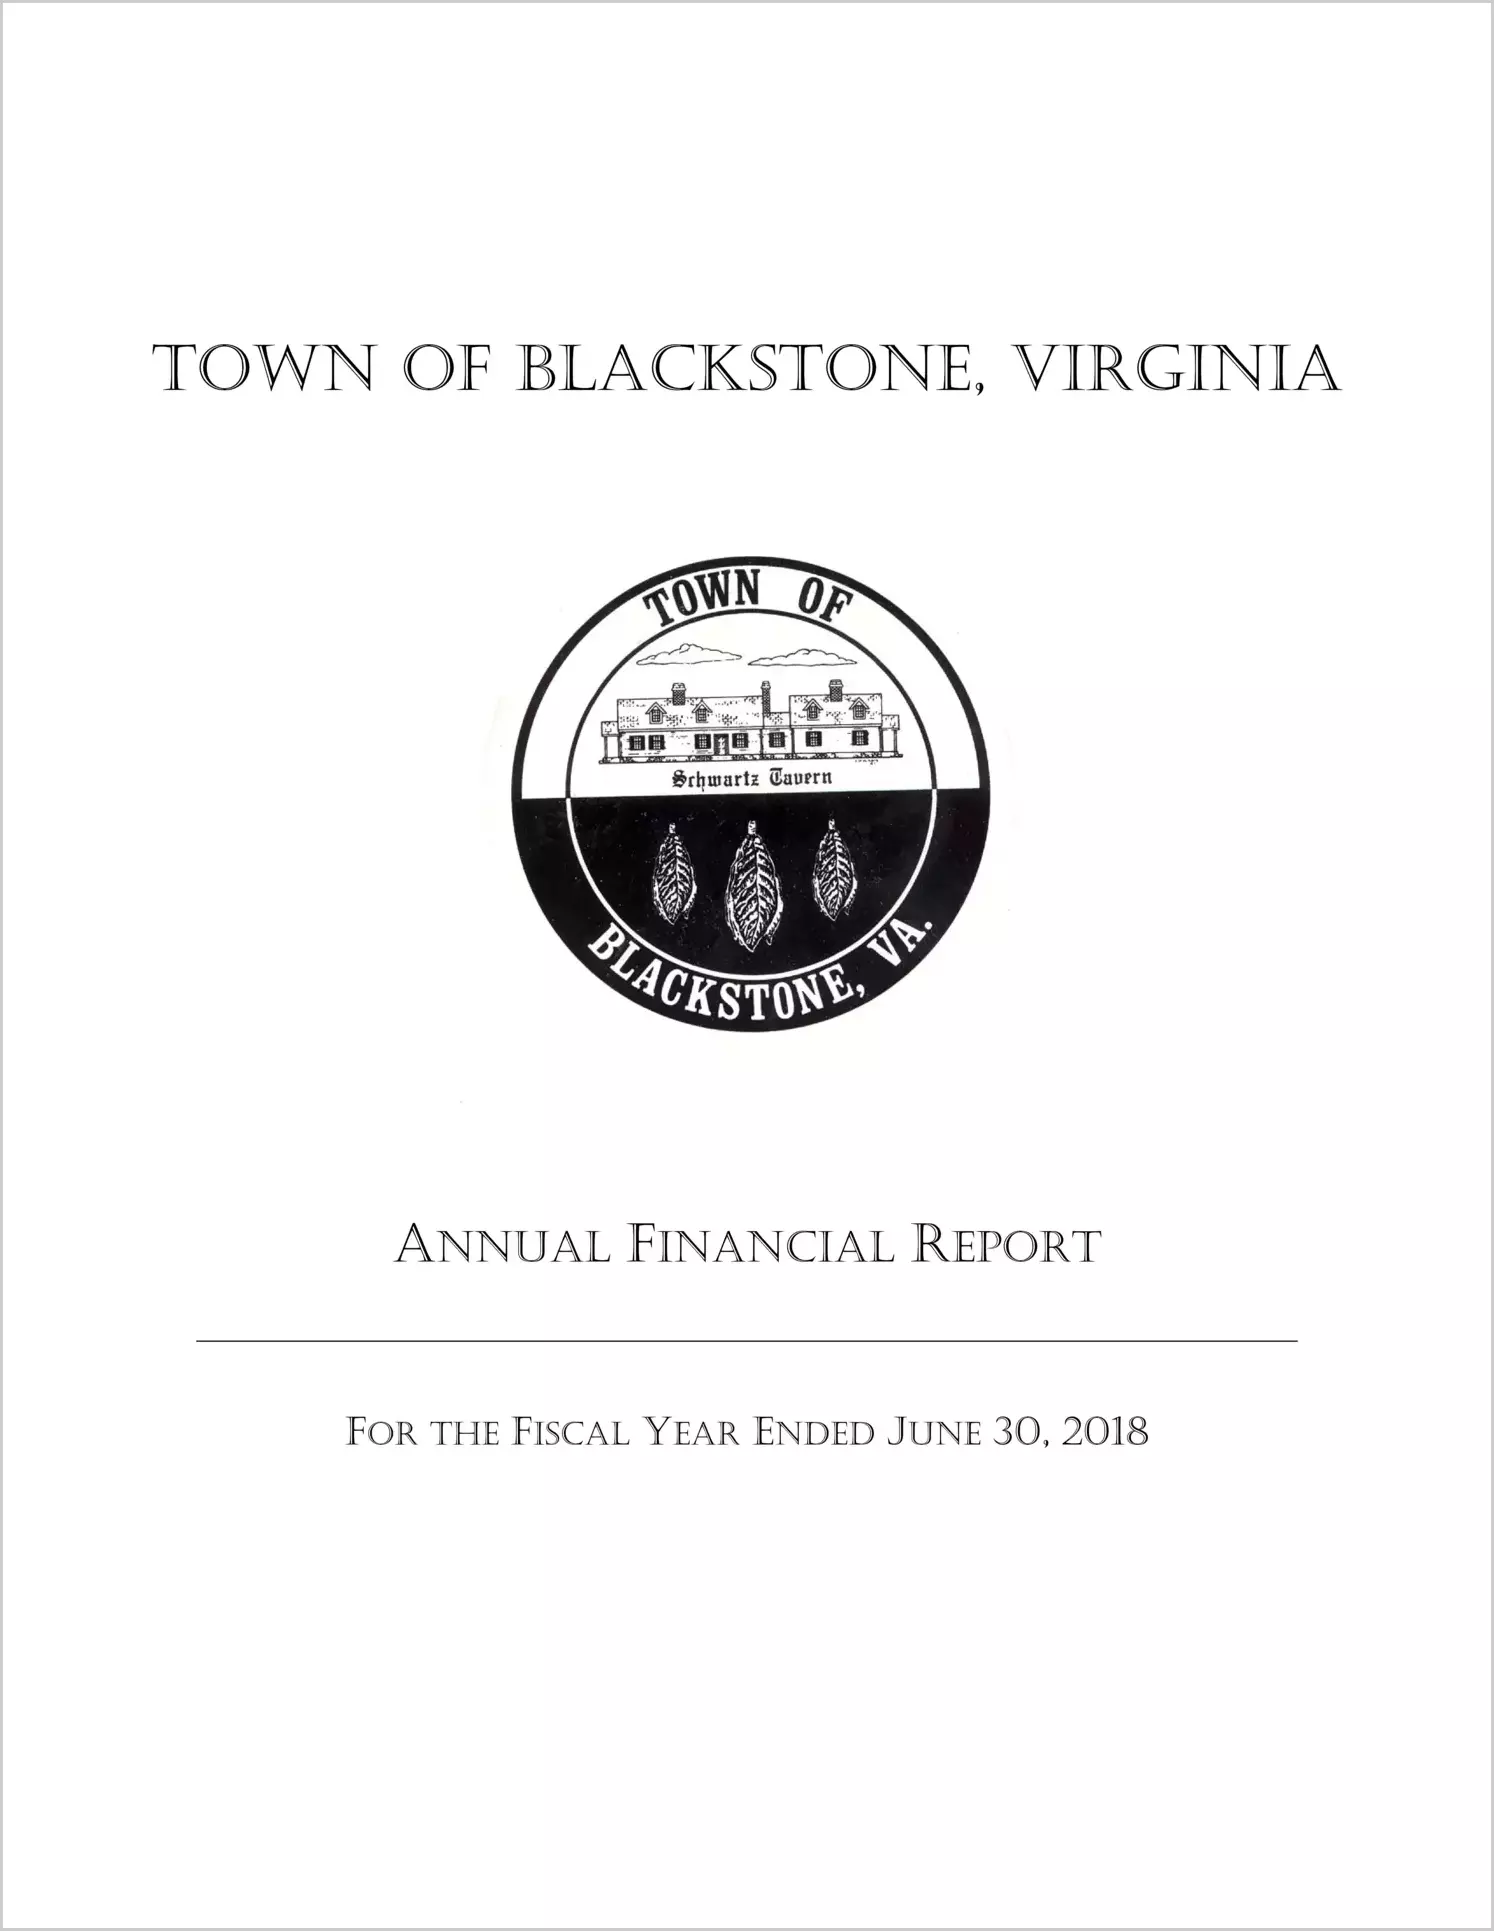 2018 Annual Financial Report for Town of Blackstone